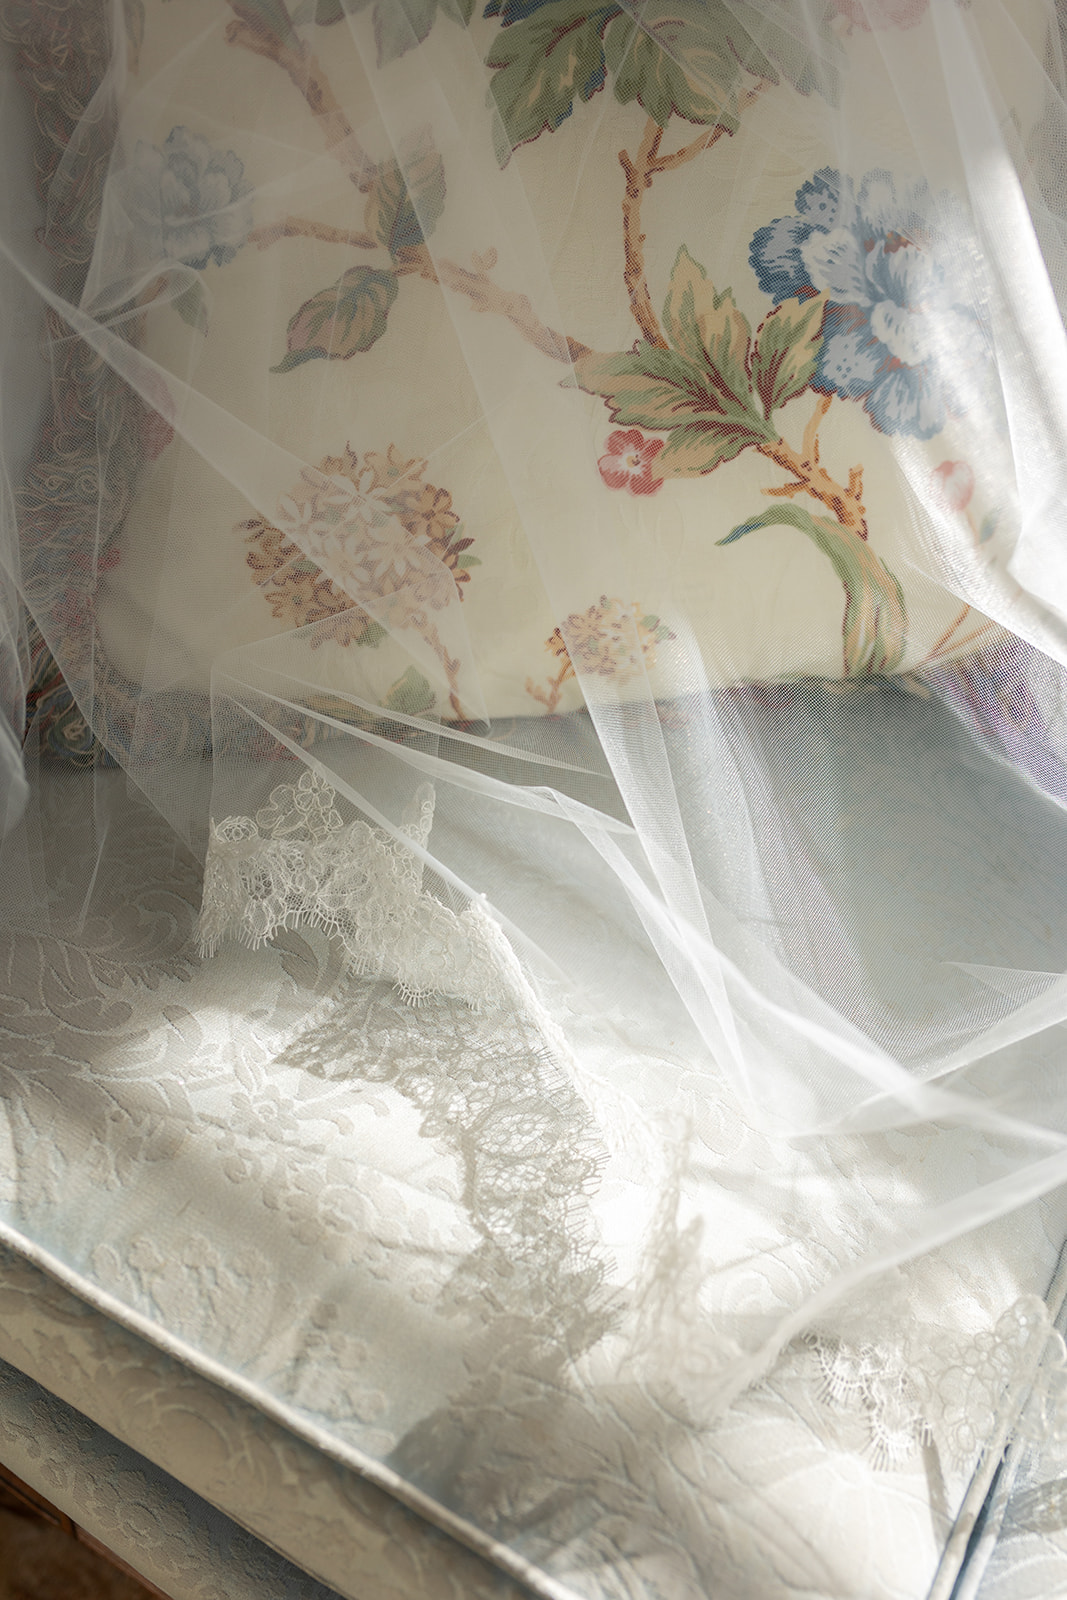 Wedding veil on sofa with flower pillow photographed.